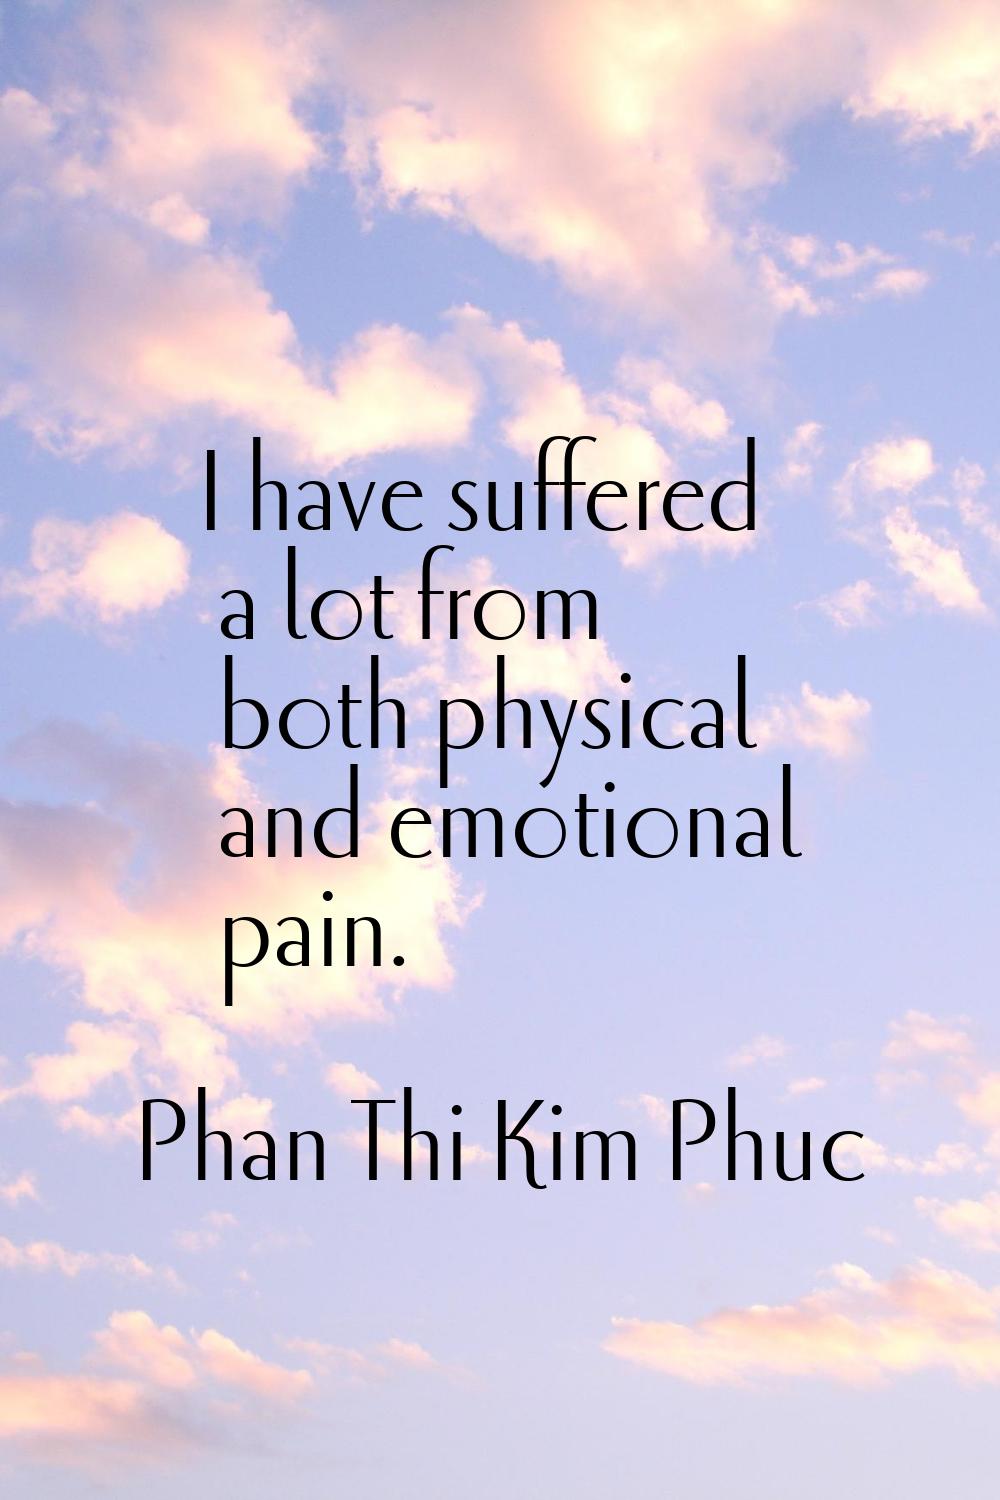 I have suffered a lot from both physical and emotional pain.